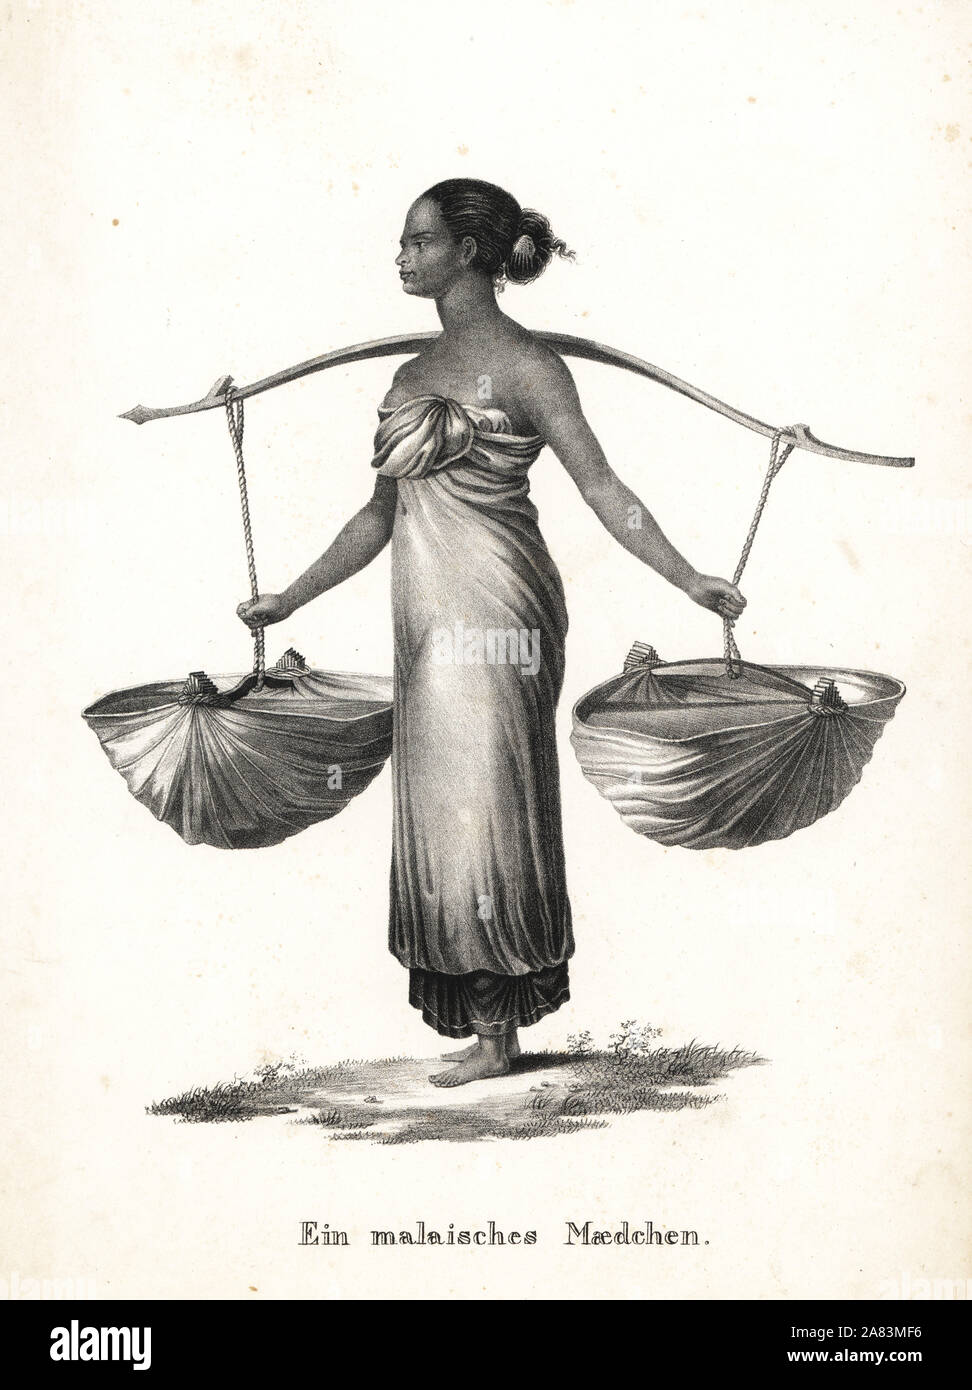 Malay girl with hair tied up carrying baskets from a yoke. Lithograph by Karl Joseph Brodtmann from Heinrich Rudolf Schinz's Illustrated Natural History of Men and Animals, 1836. Stock Photo